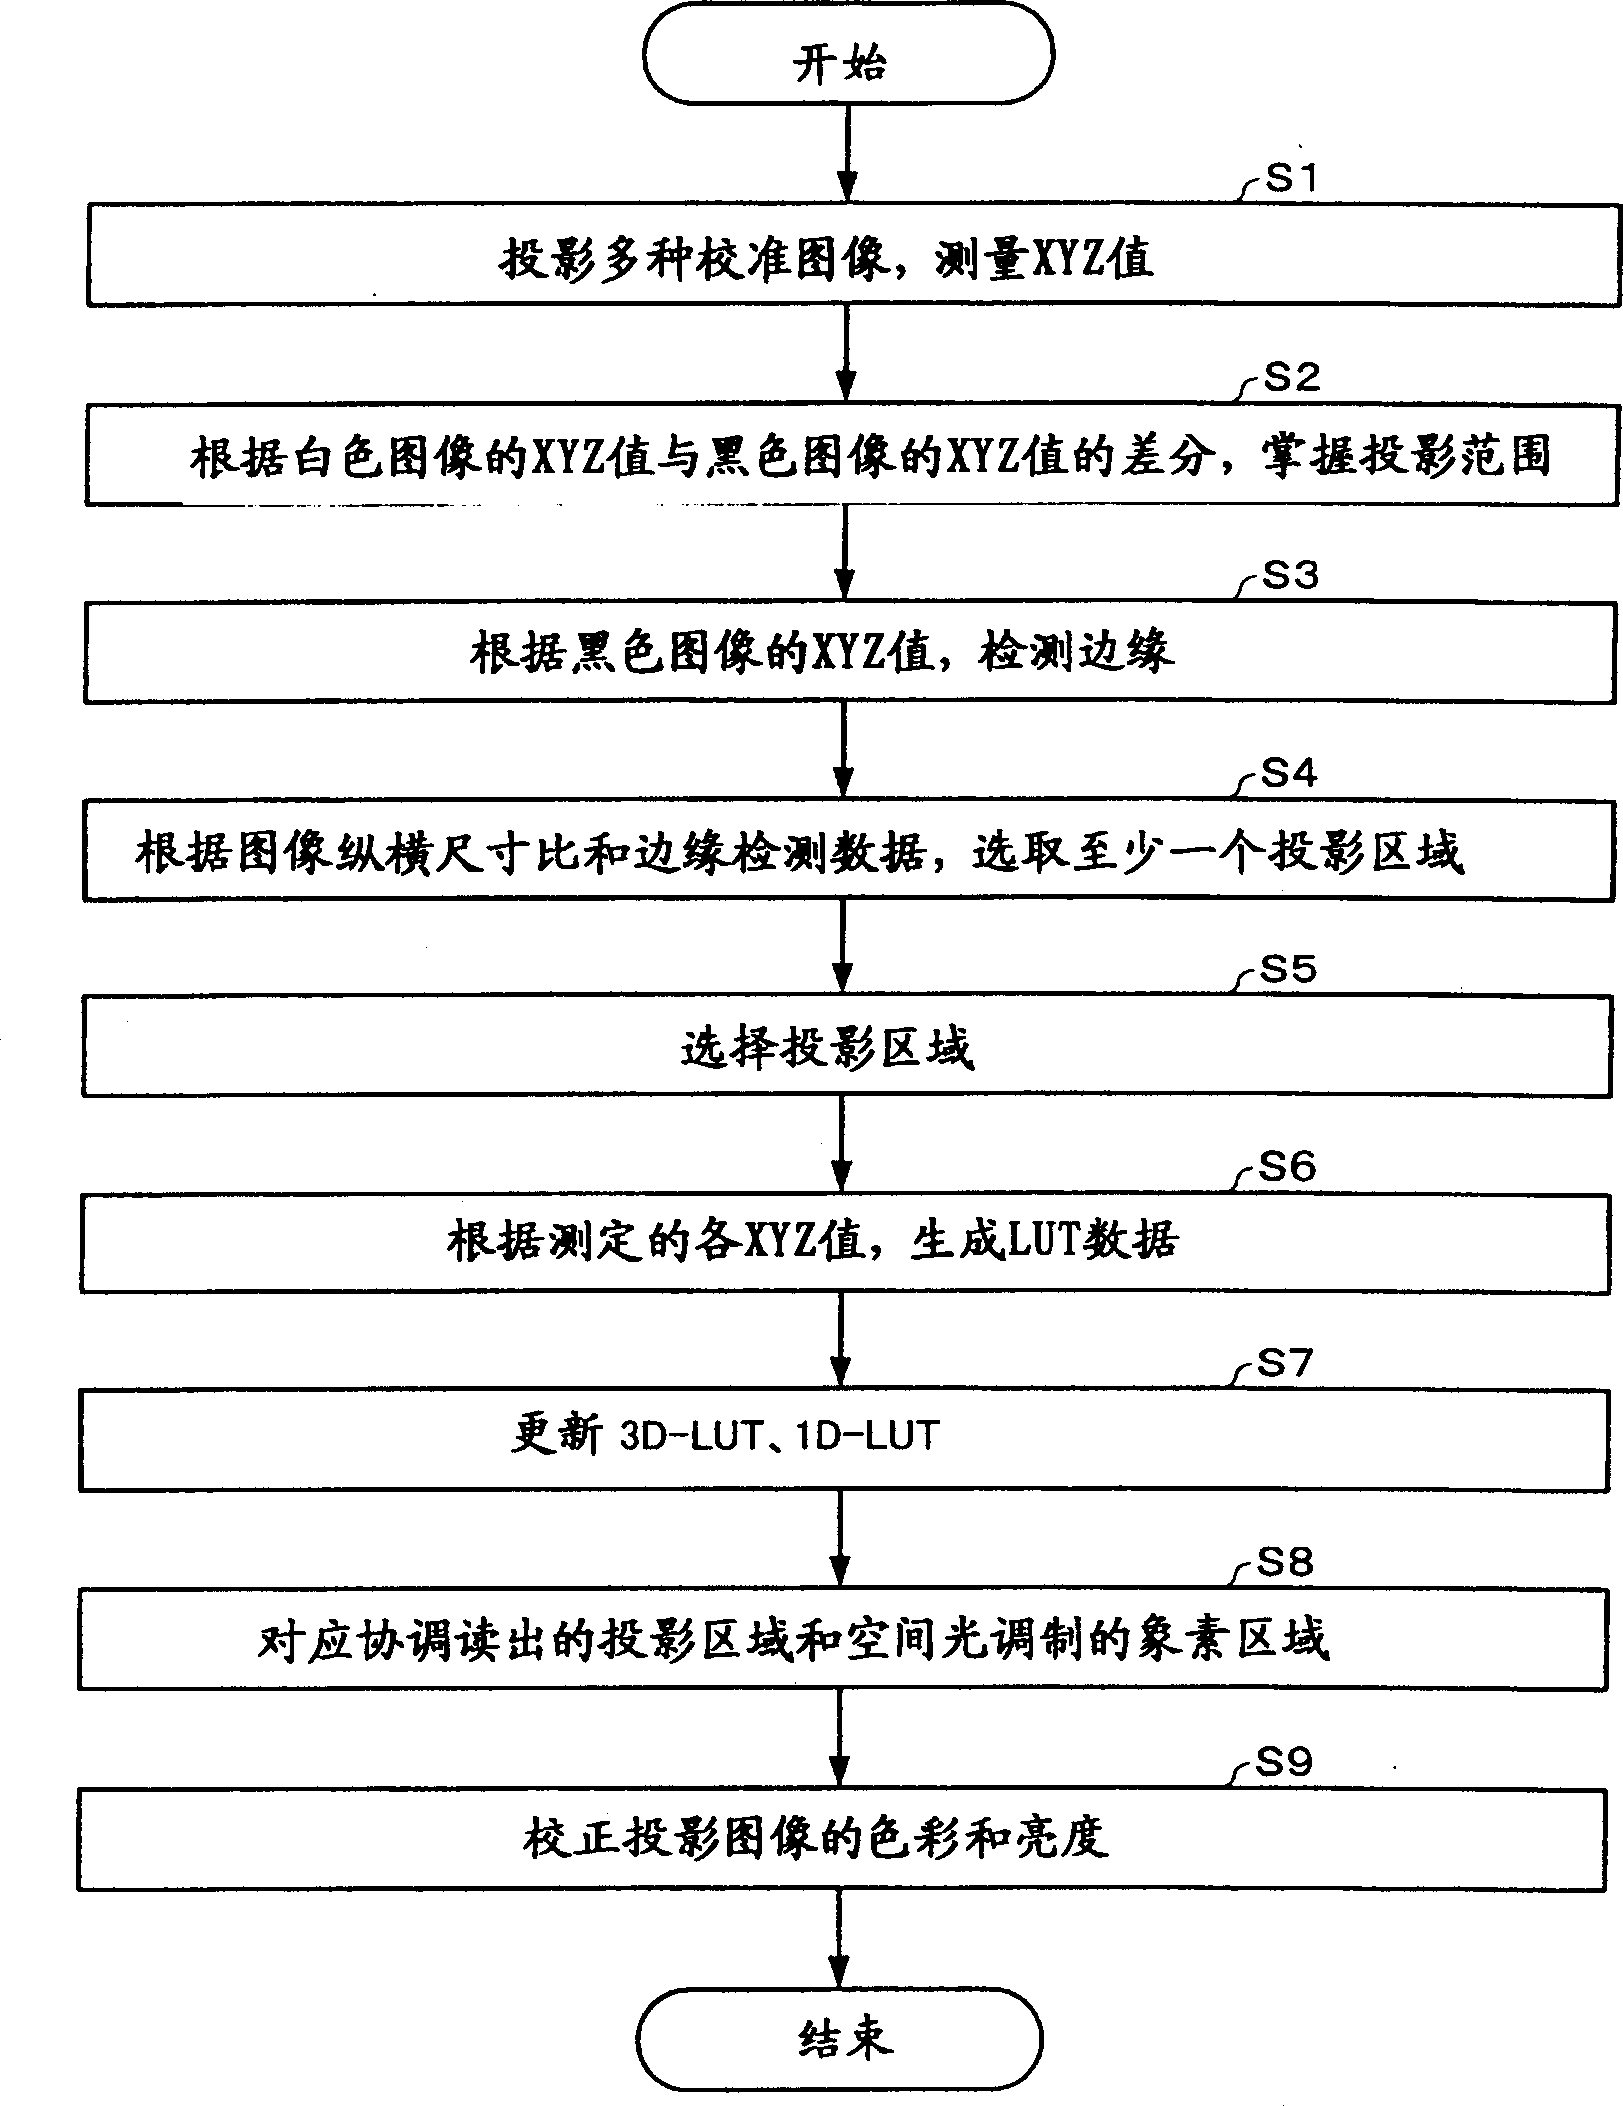 Projective image display system, projector, information storage medium and projecting method